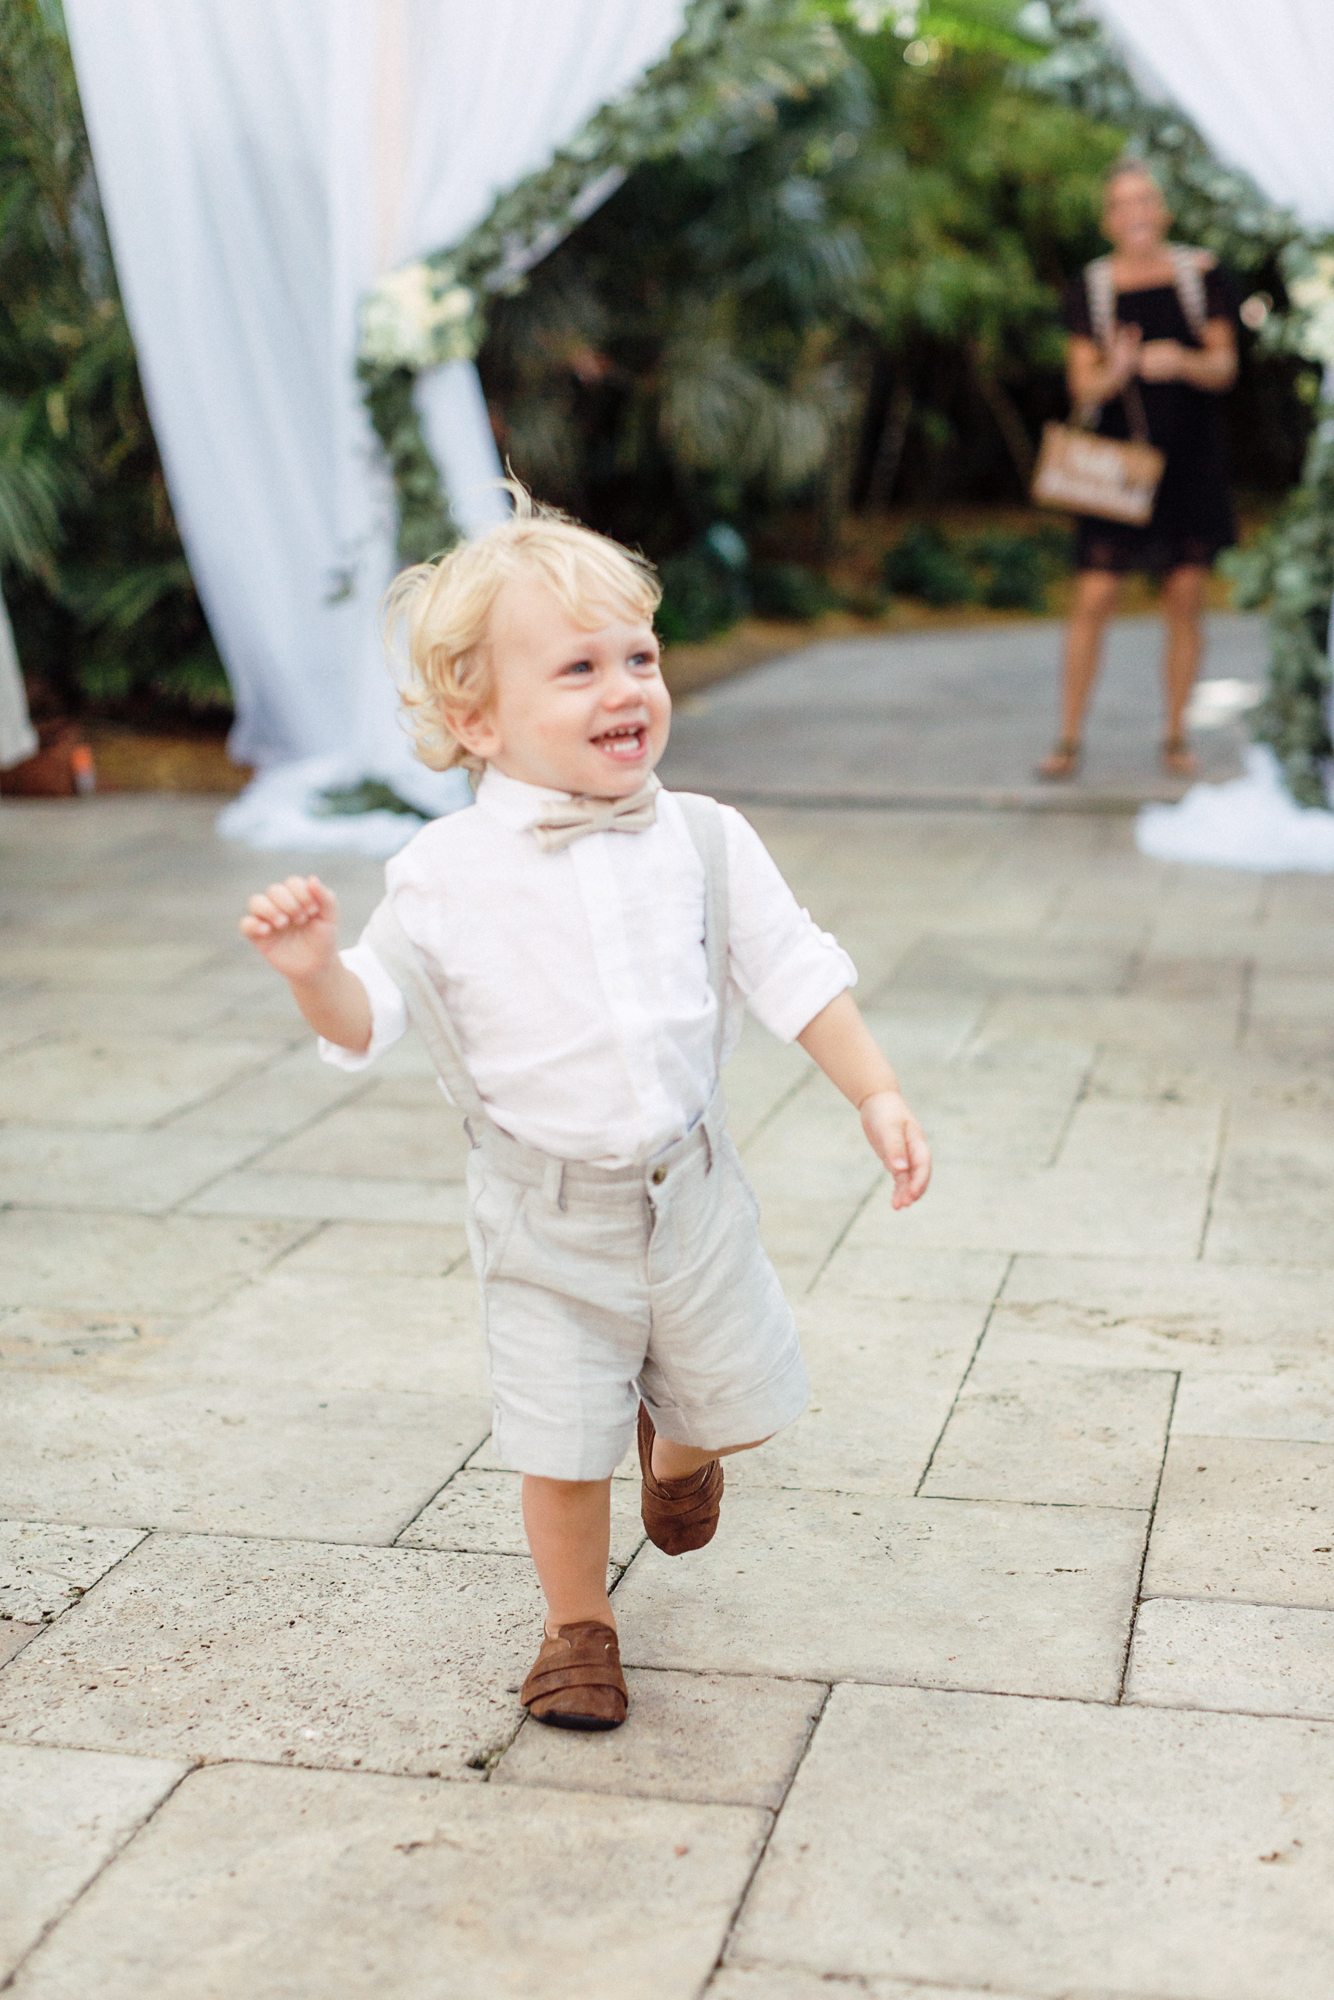 The ring bearer excitedly runs down the aisle once he sees his dad!